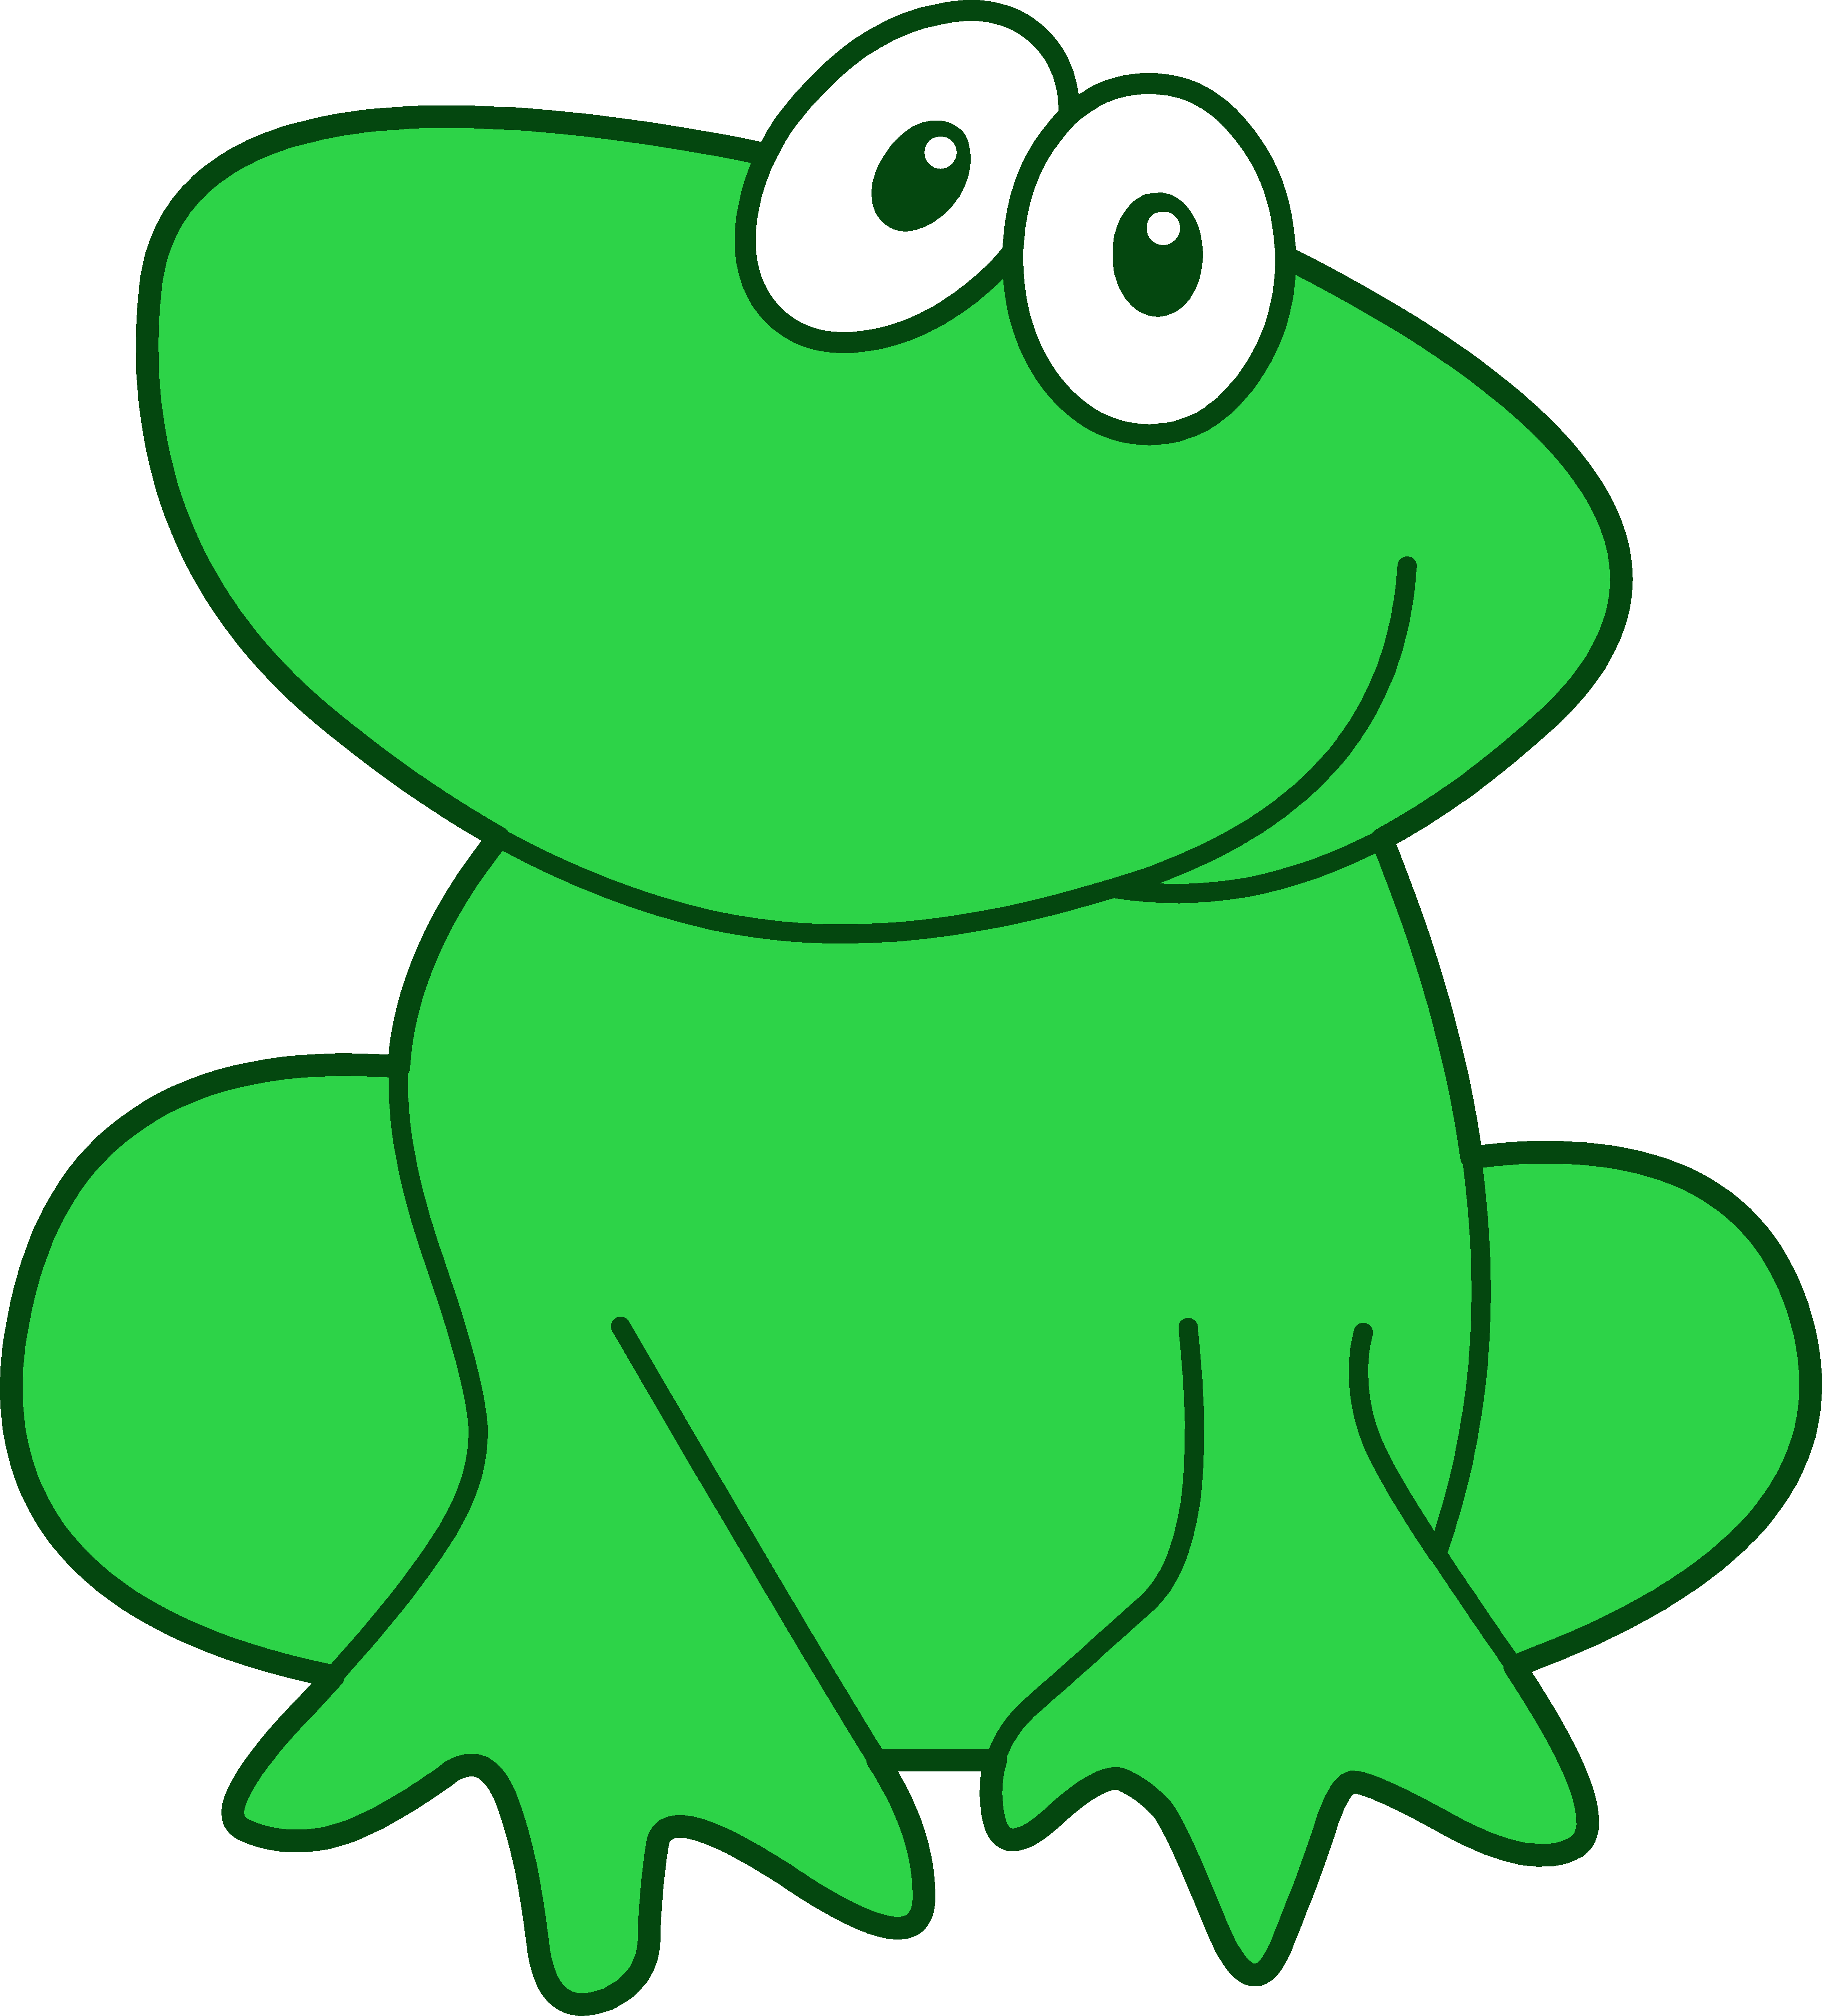 Cute little green free. Girly clipart frog